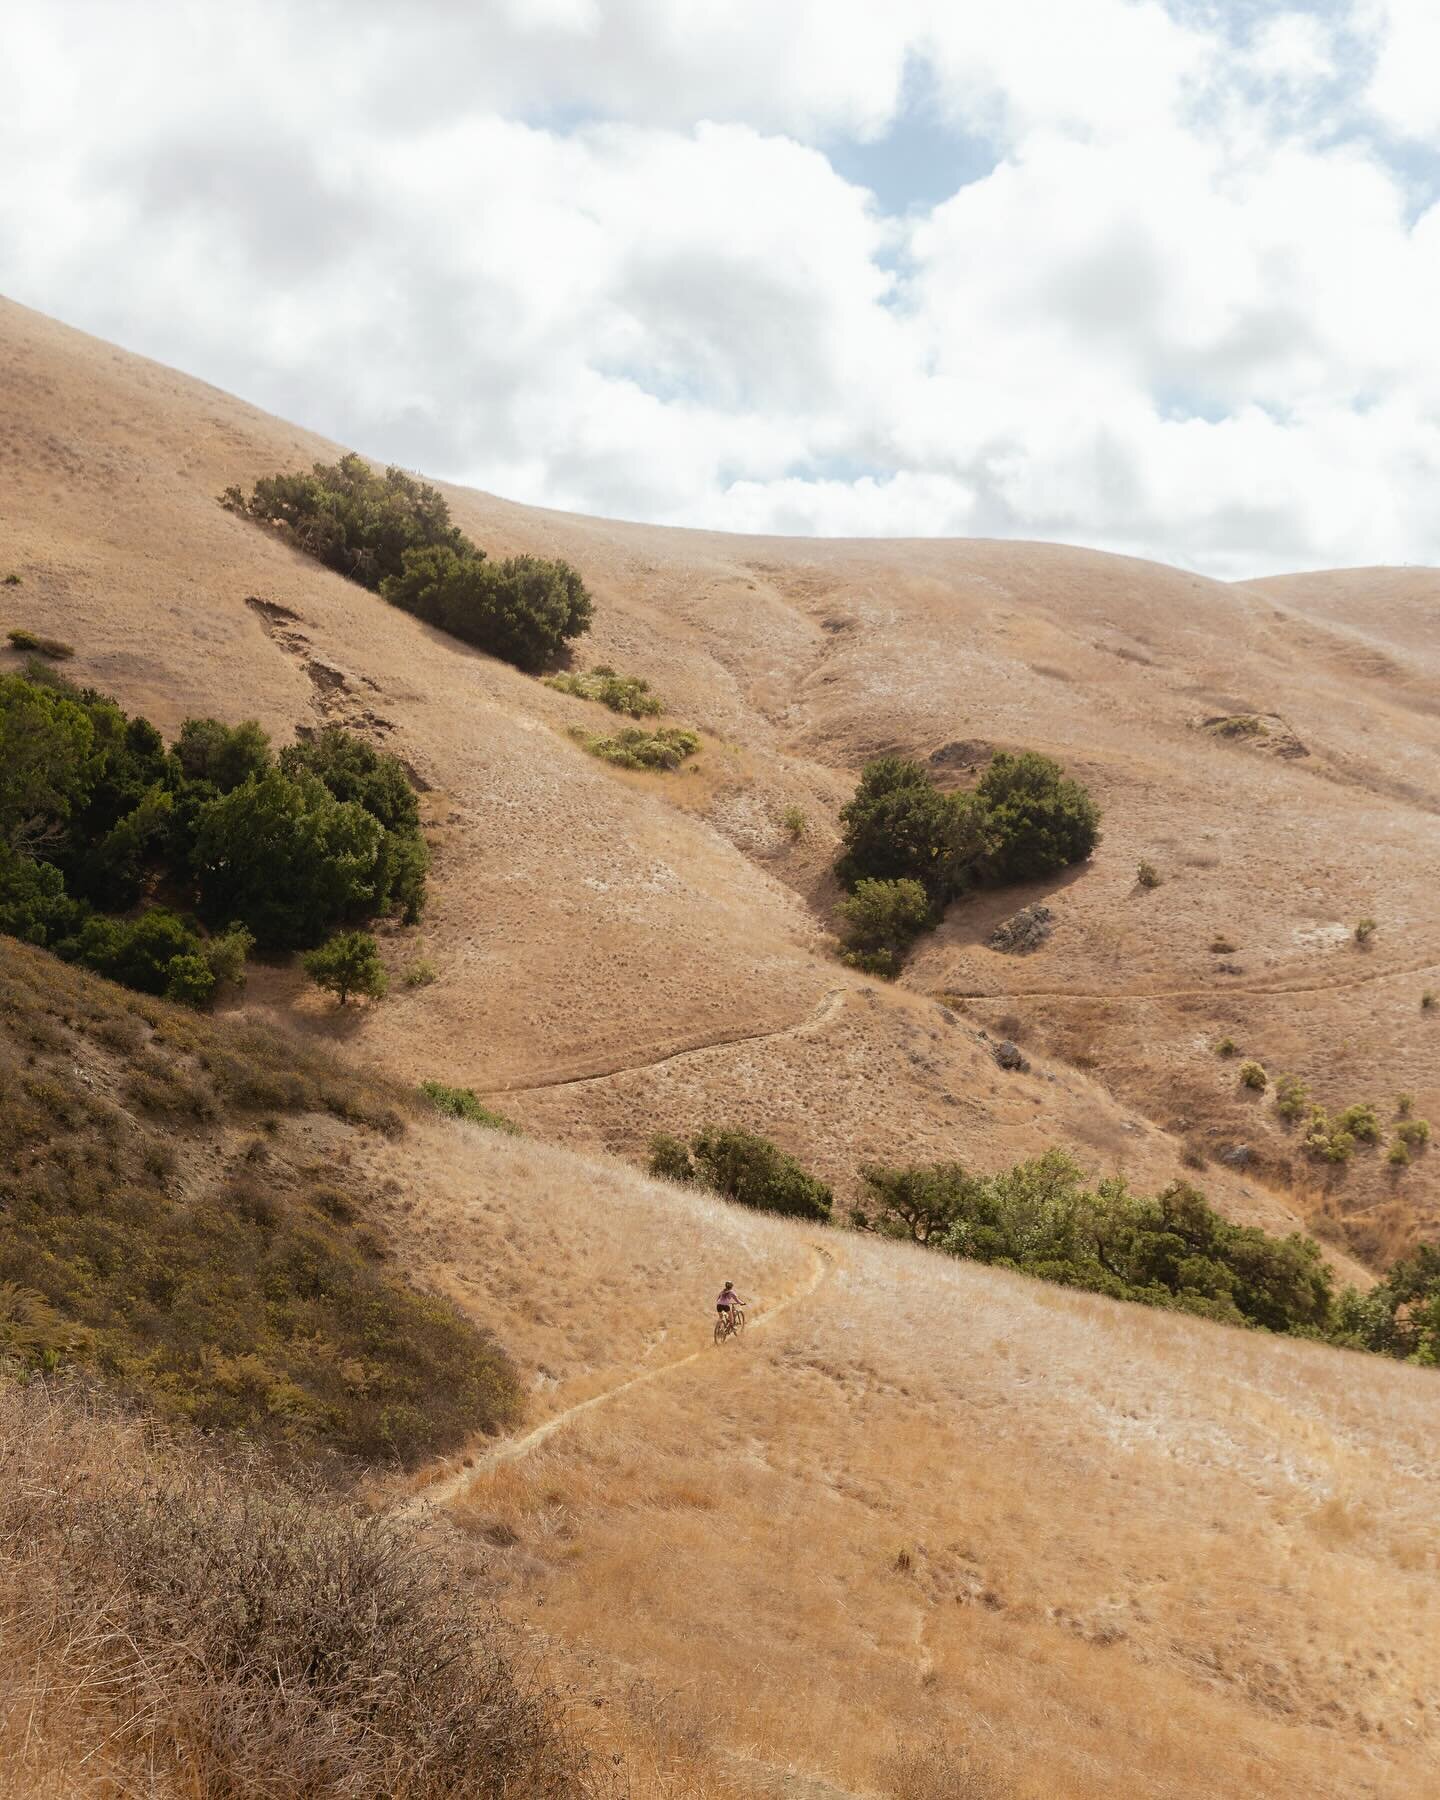 Open hills in SLO 

How far away you feel from everything while only being 5 miles from the house is probably one of my favorite things about riding in SLO. Open hills and open trails 

#visitslo #slocal #mtb #photopace